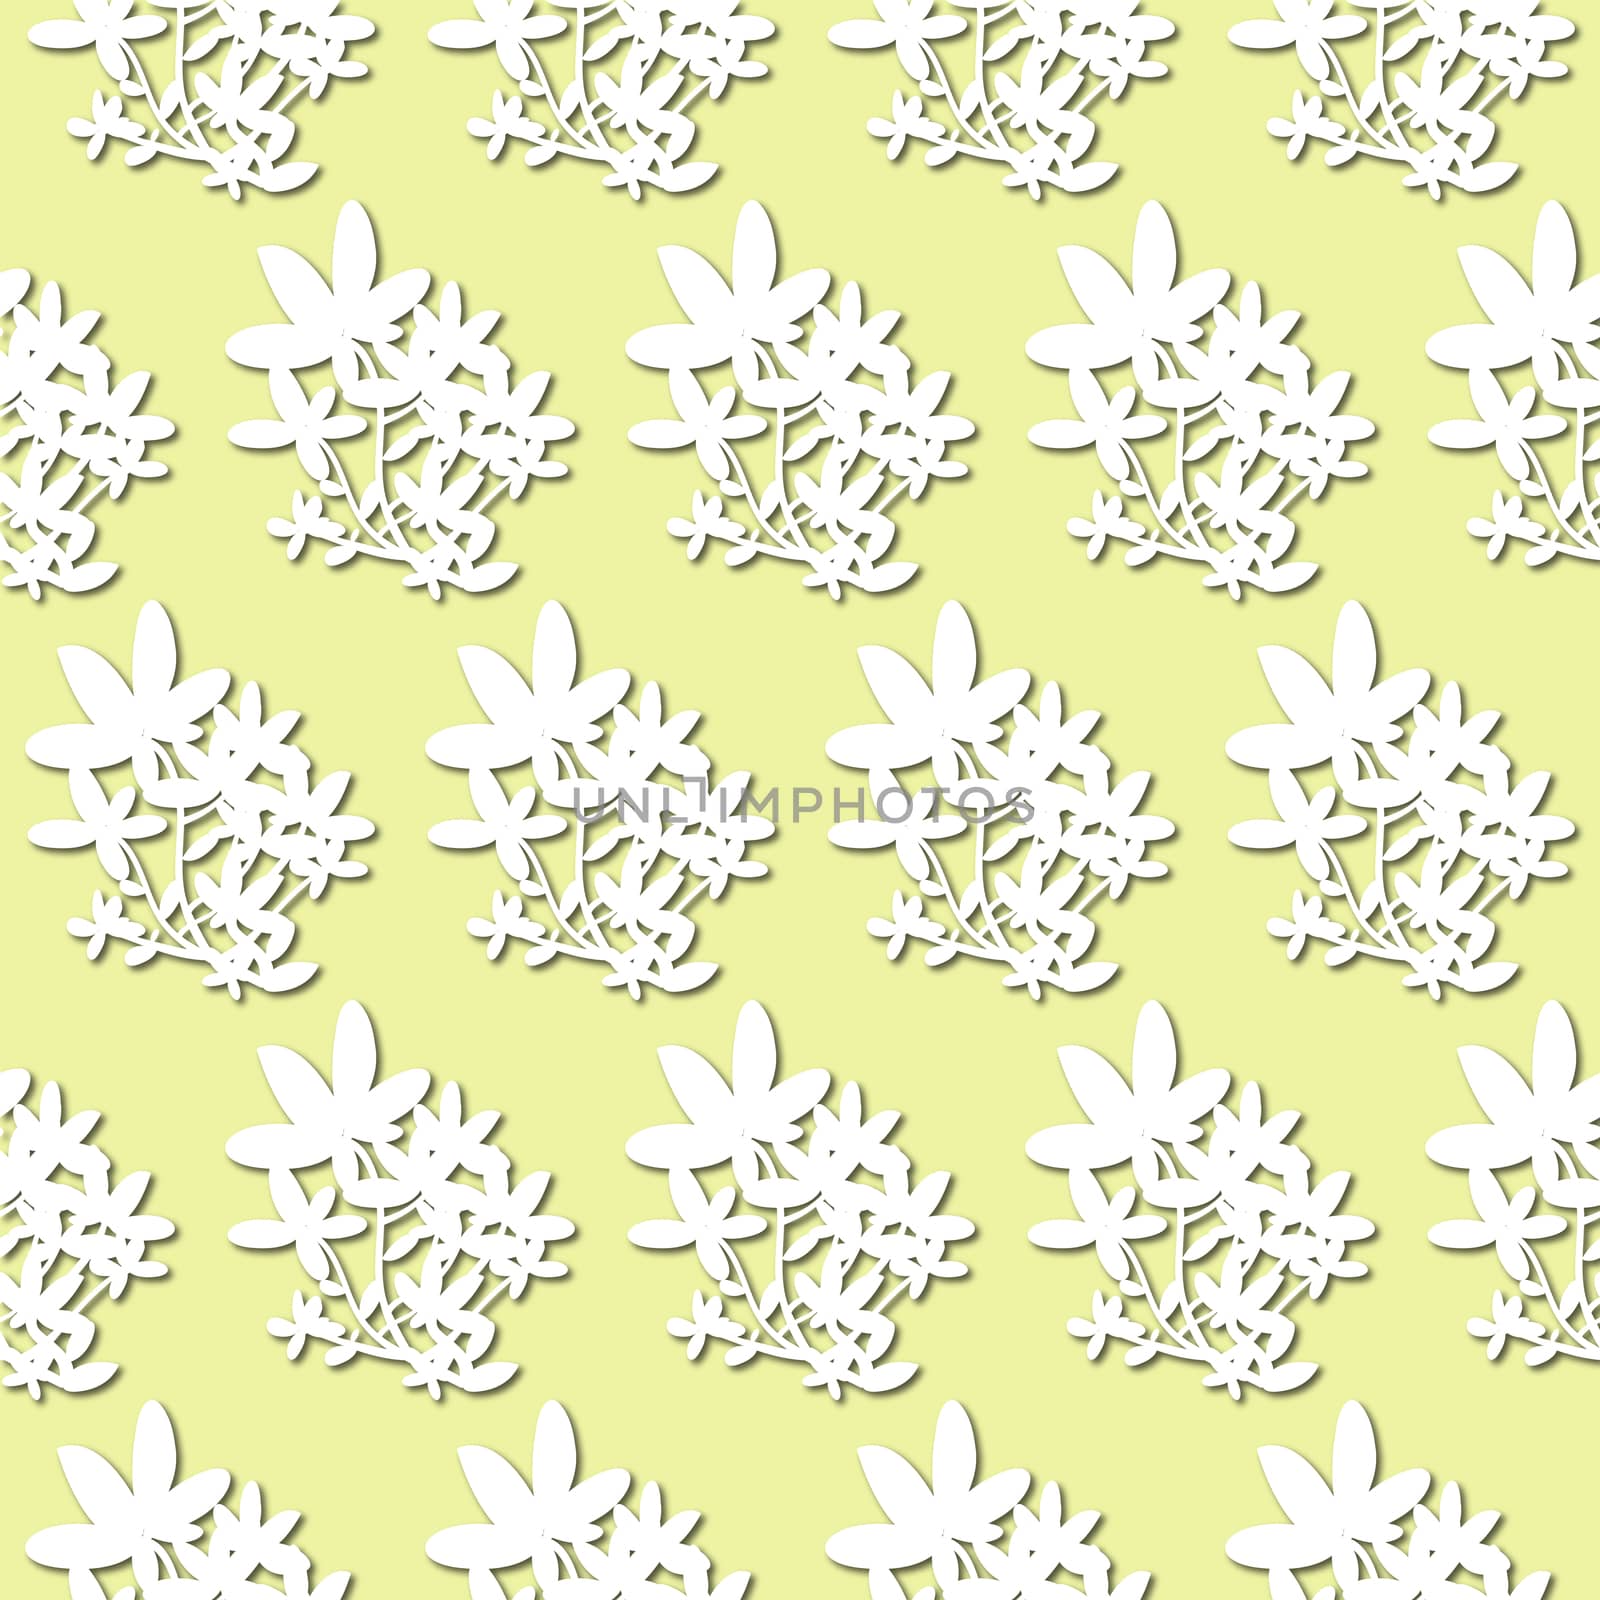 White plant, flowers silhouette on pale green background, seamless pattern. Paper cut style with drop shadows and highlights.